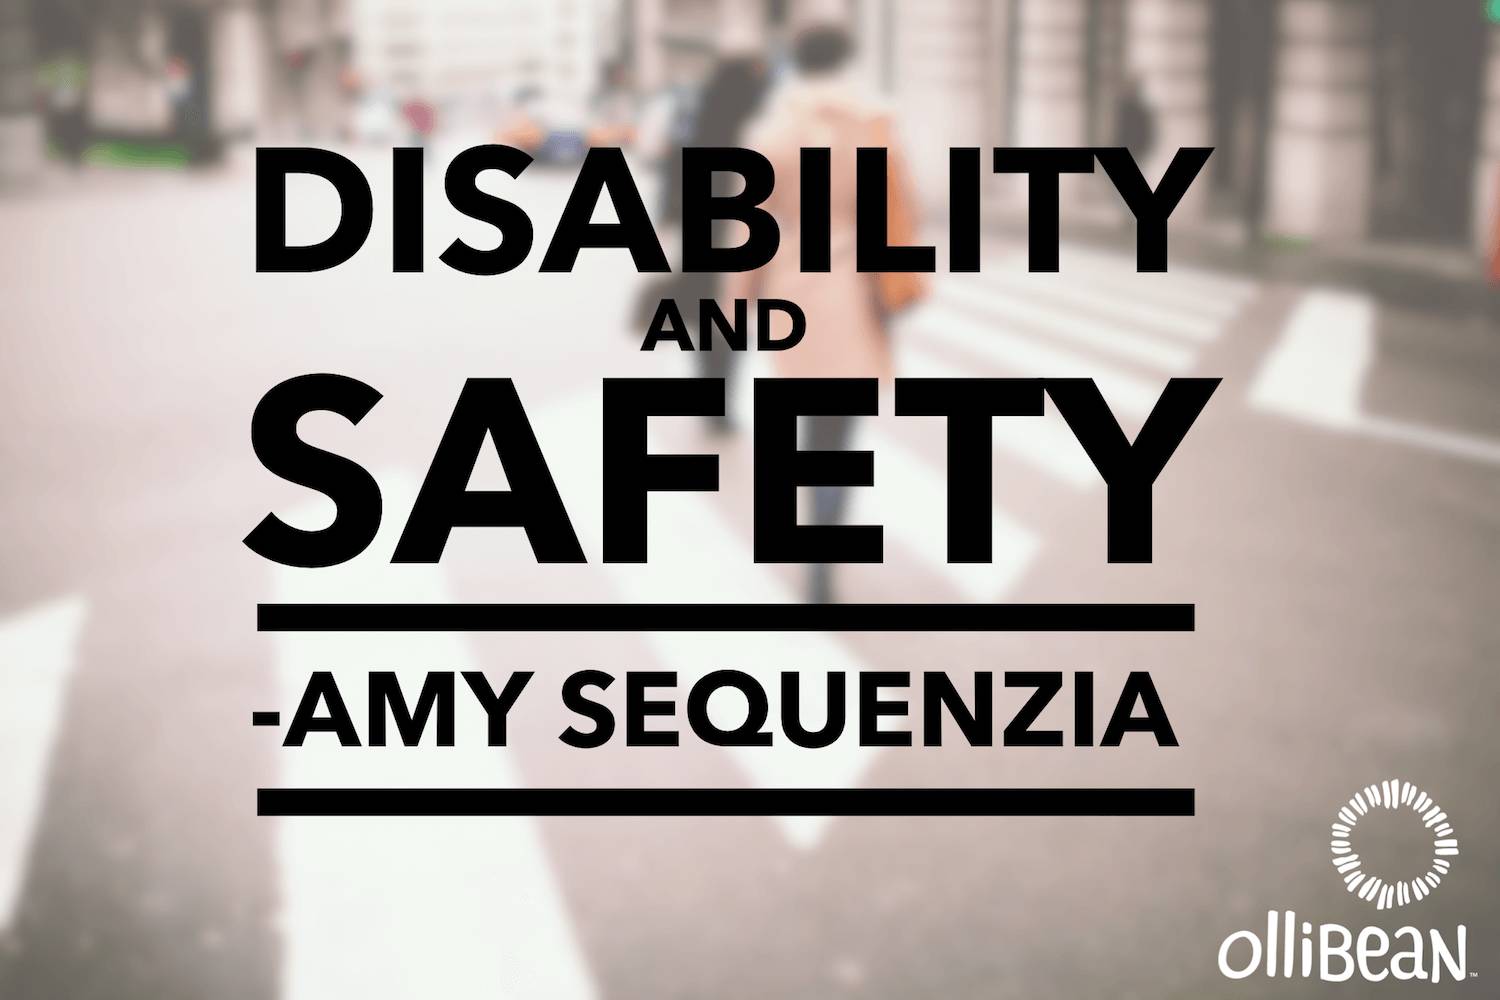 Disability and Safety by Amy Sequenzia on Ollibean